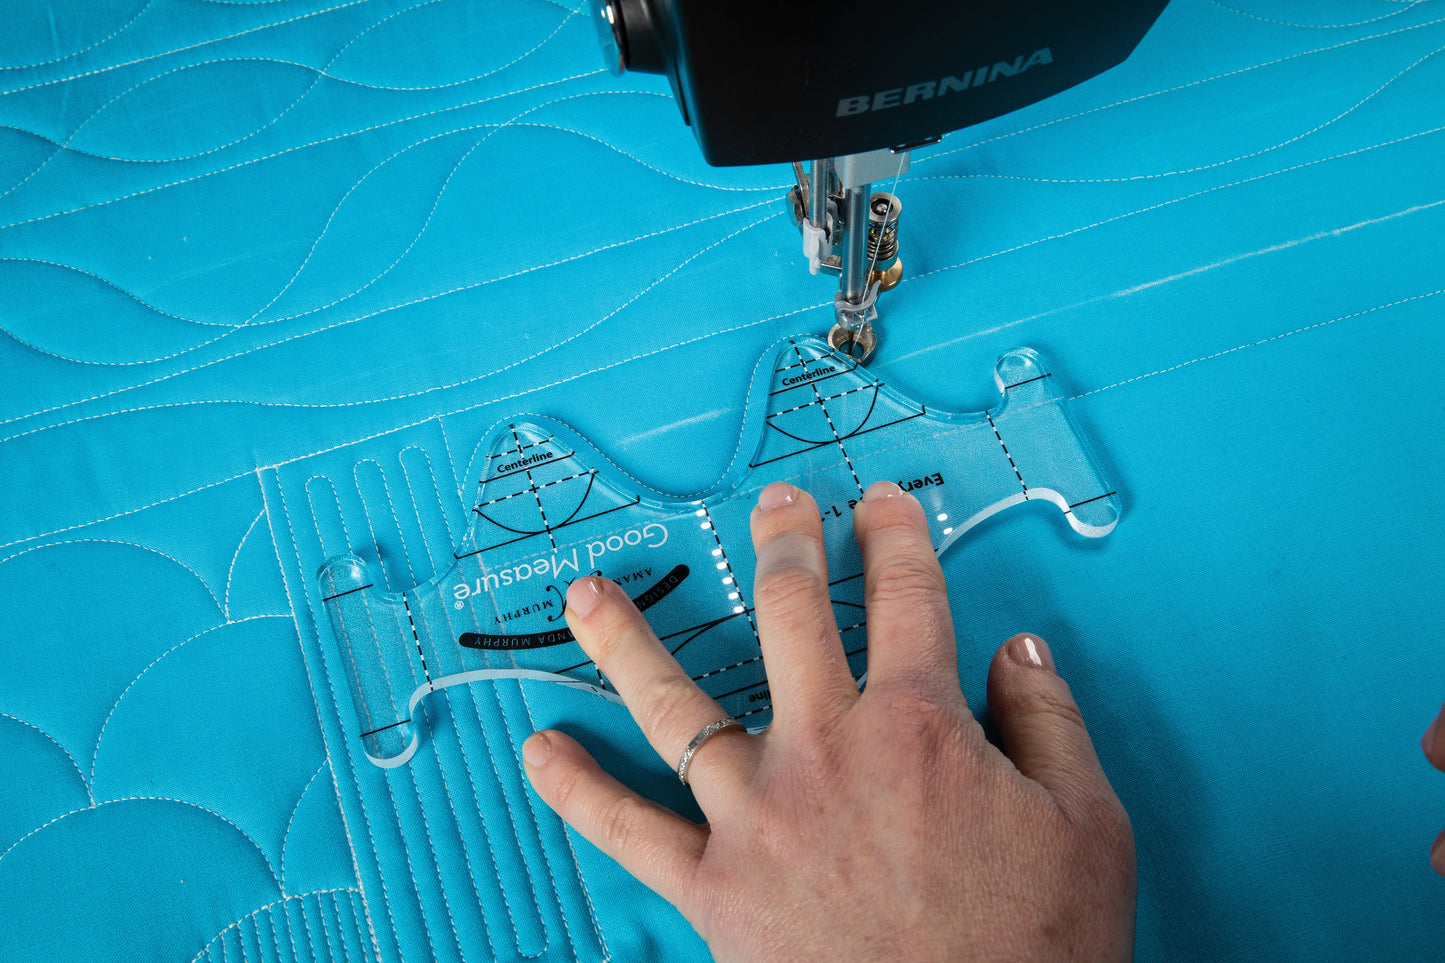 The Ultimate Guide to Rulerwork Quilting